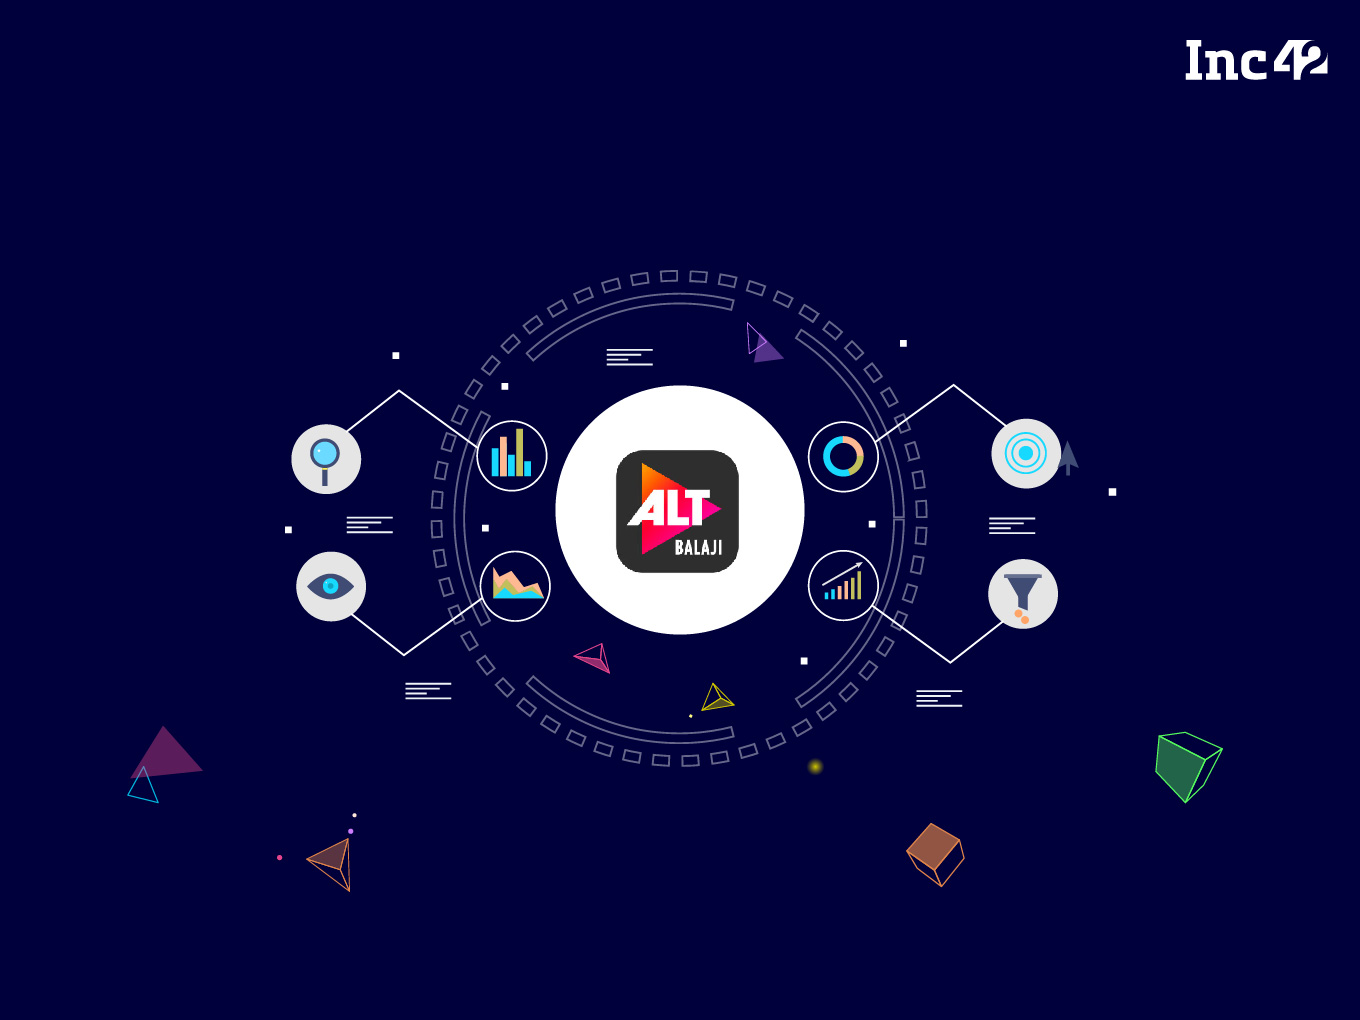 [What The Financials] Will ALTBalaji Sustain Q2 Revenue Growth After Pivoting To Paid Model?